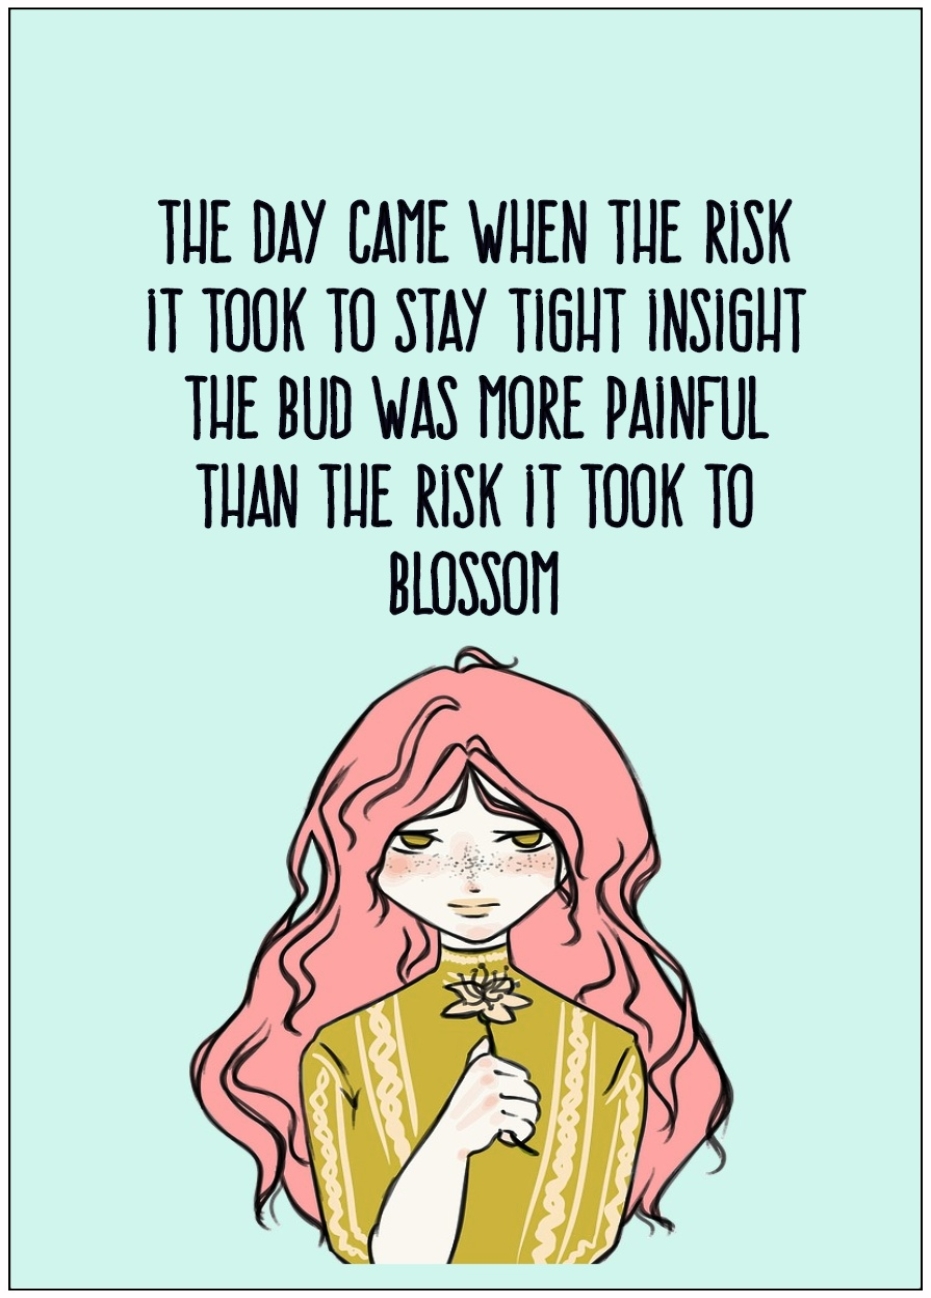 #Quote Anais Nin And the day came when the risk it took to stay tight inside the bud was more painful than the risk it took to blossom